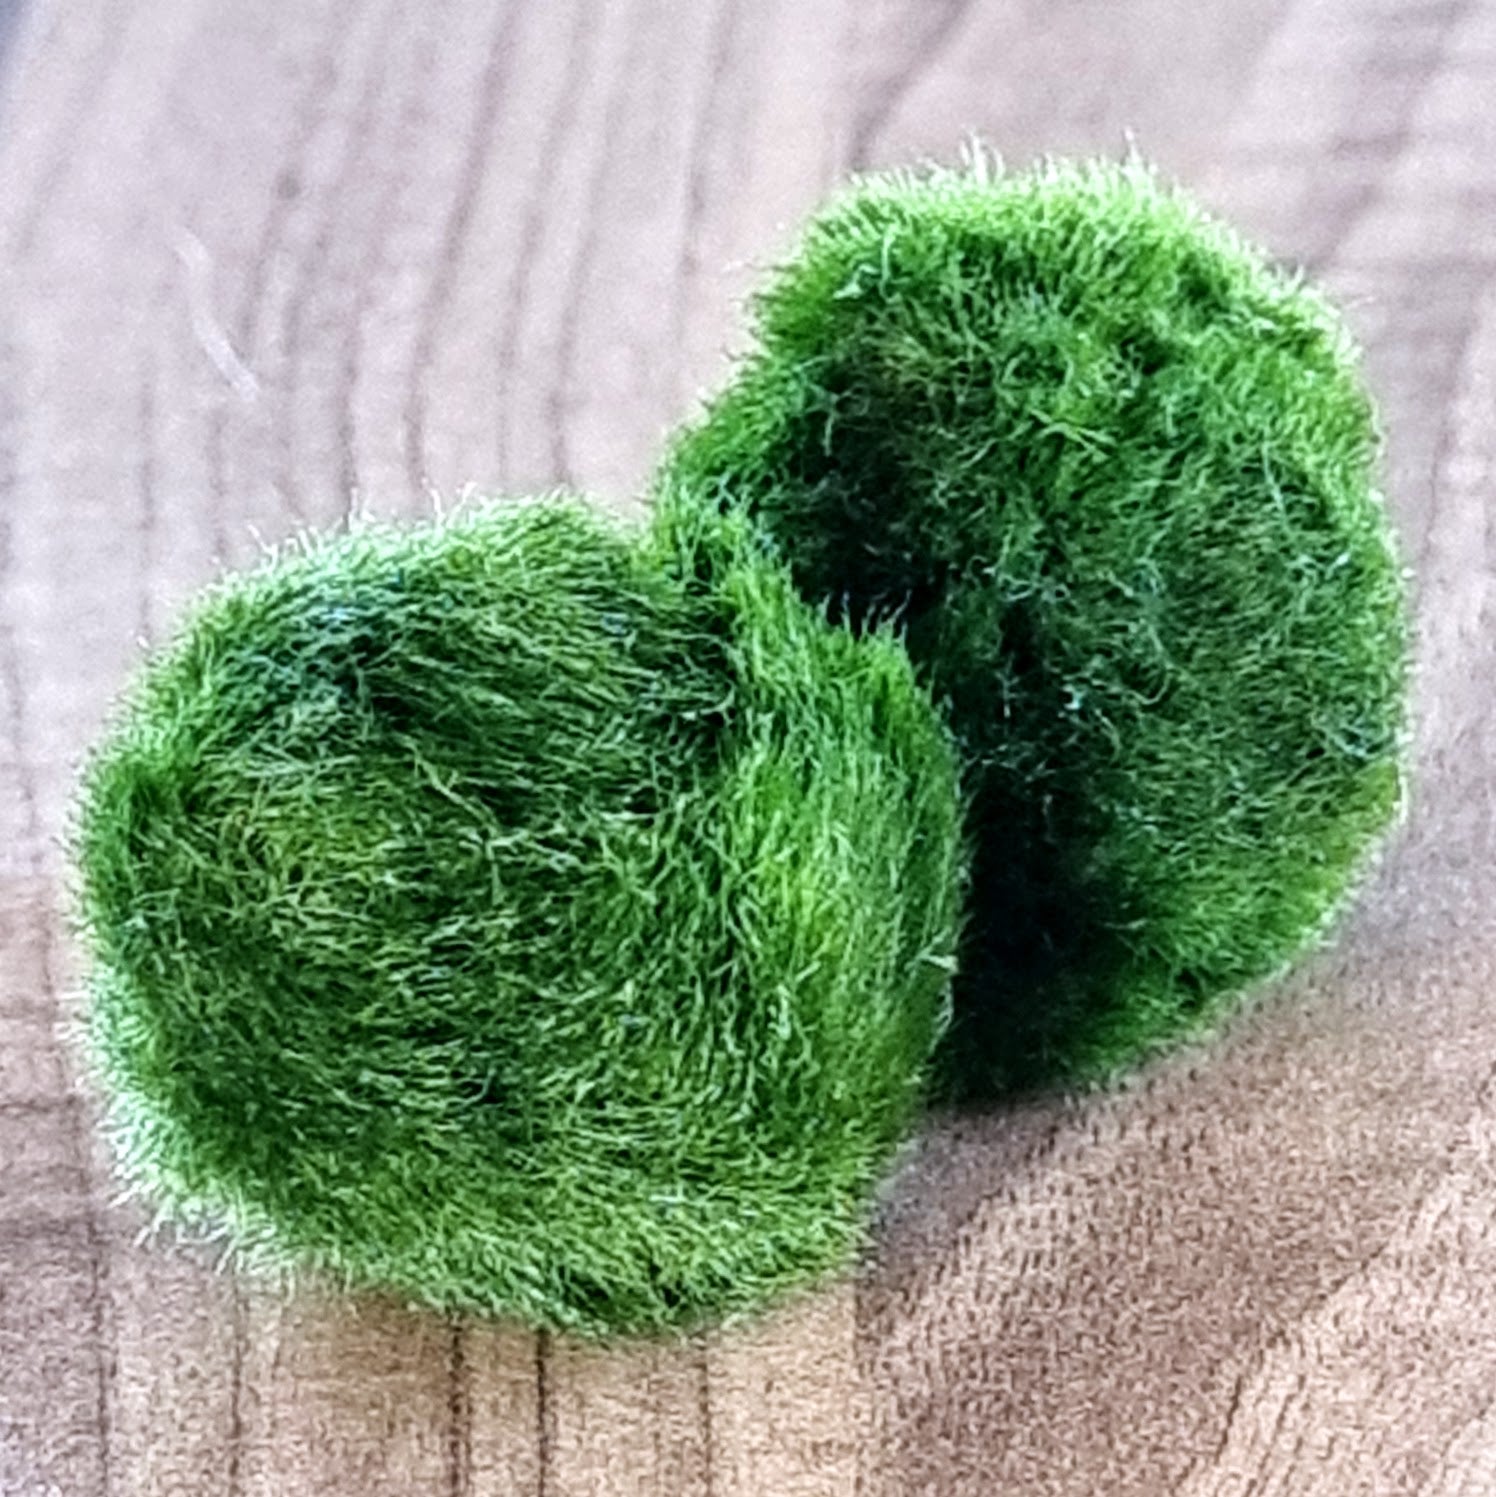 Two Marimo moss balls up close and out of water, showing in detail the small green colony fibres